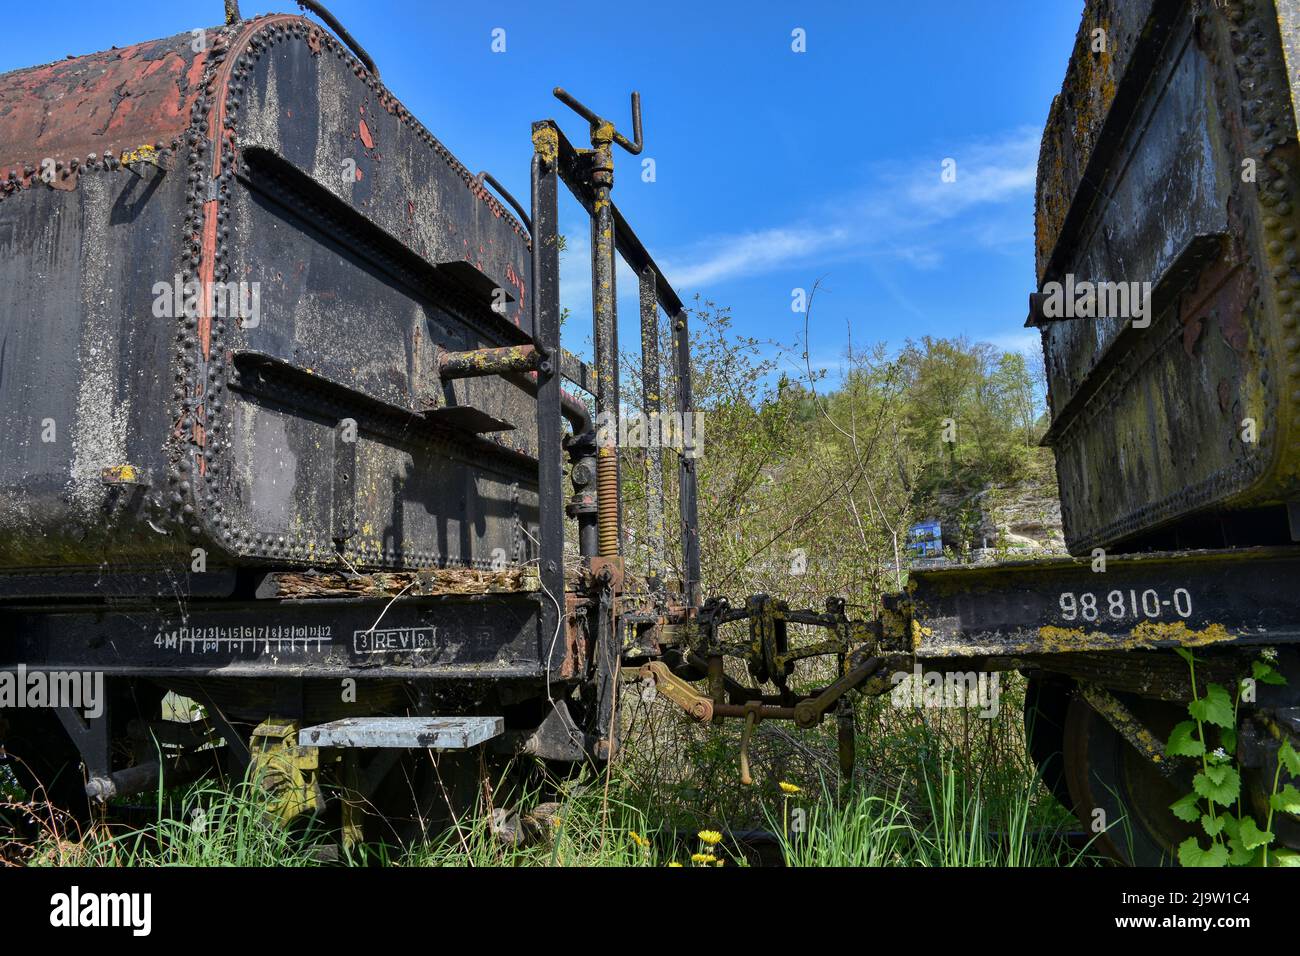 Wassertank High Resolution Stock Photography and Images - Alamy